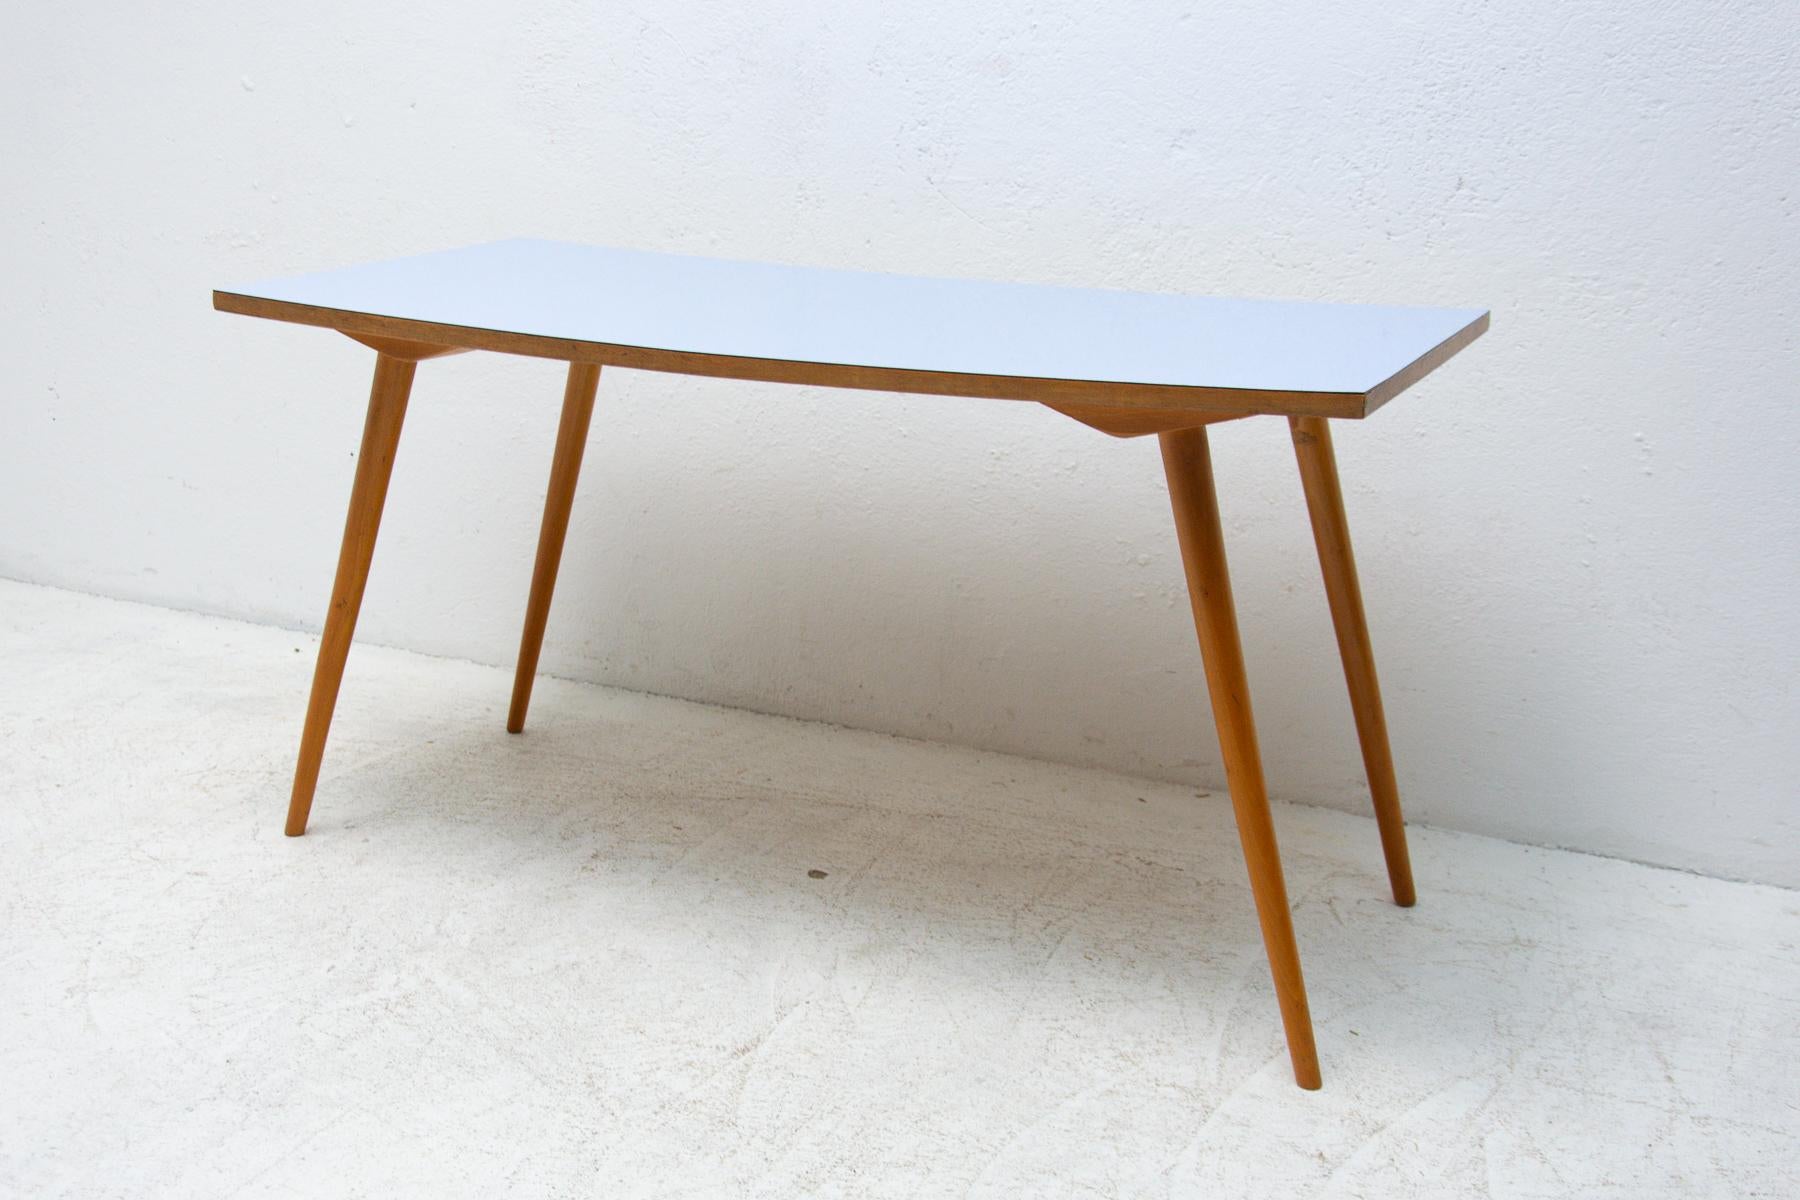 Mid century coffee table with a formica plate, it was made in the former Czechoslovakia in the 1960´s. Very interesting shaping. In very good vintage condition, just bears minor signs of age and use.